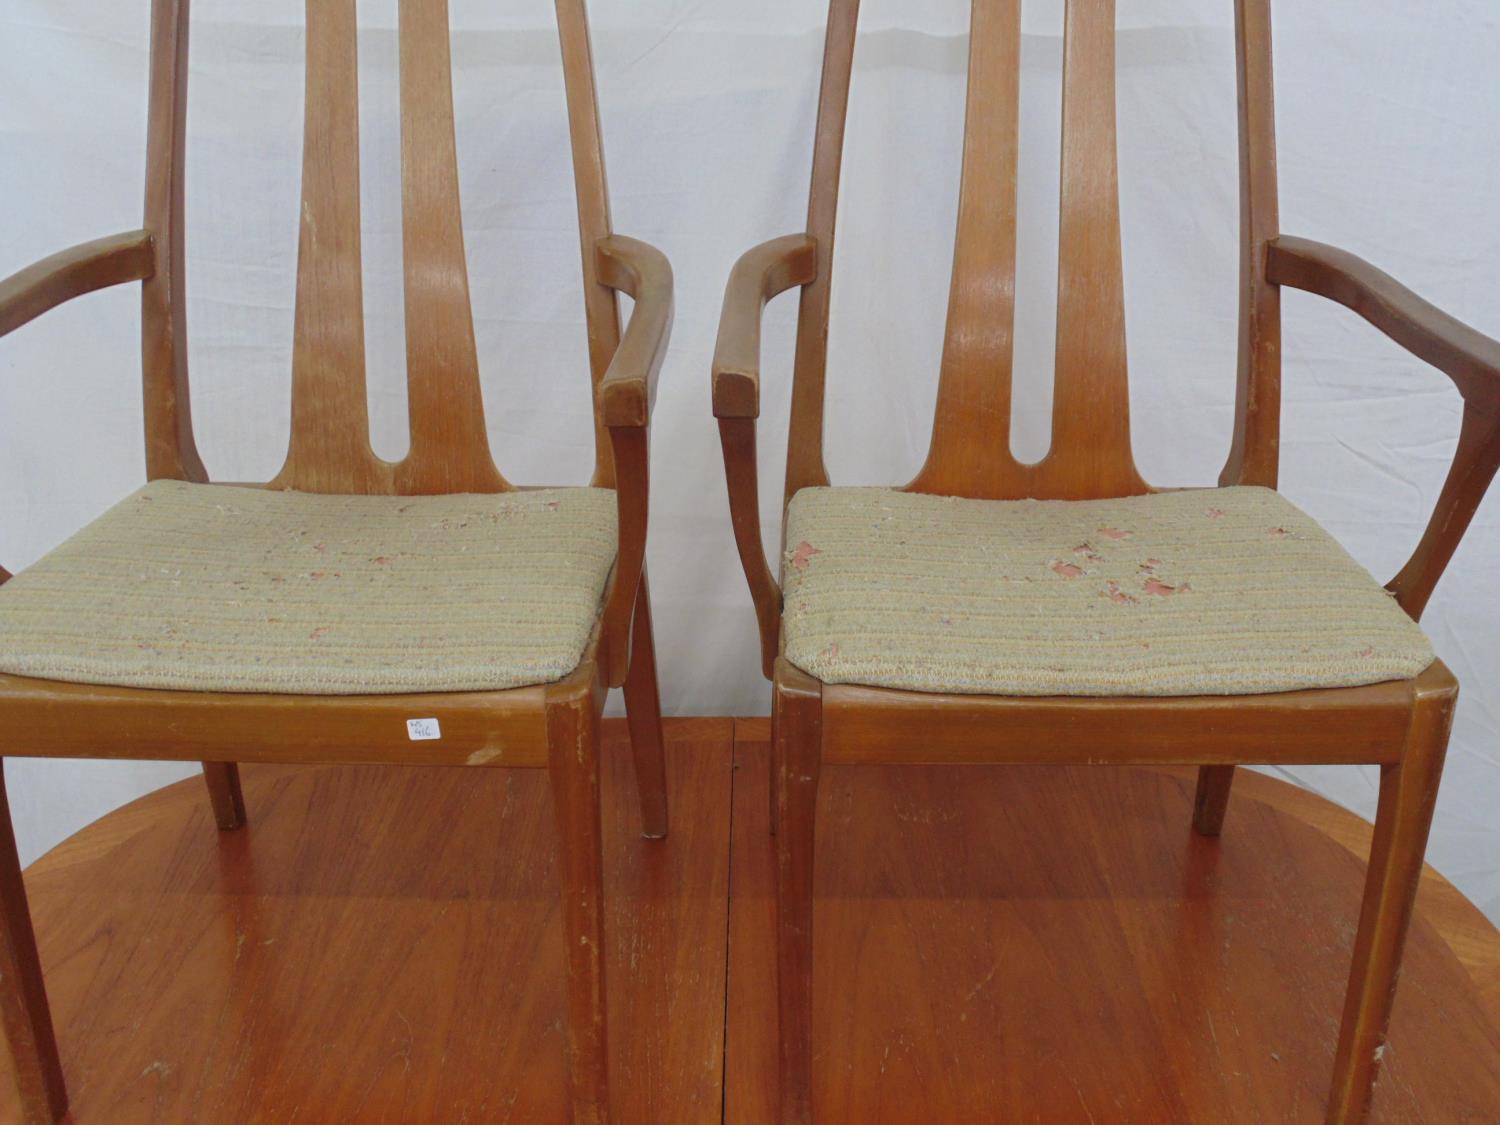 Set of six Nathan chairs (two carvers and four standard - one loose seat) - 47cm x 44cm x 96cm - Bild 5 aus 6